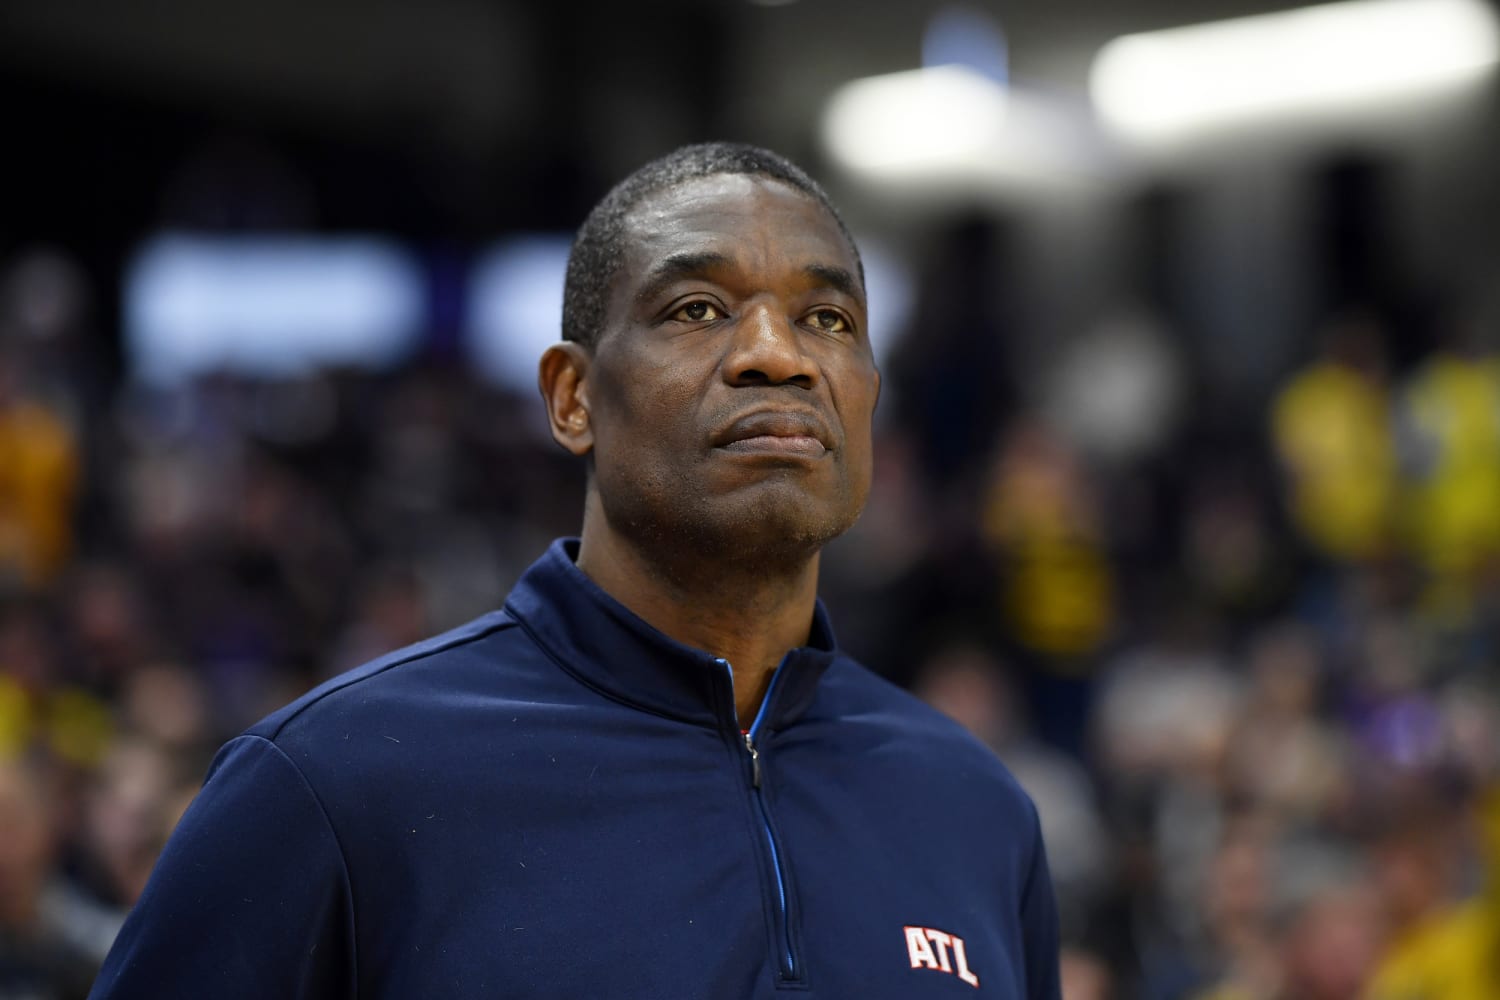 Dikembe Mutombo stands tall as NBA career comes to an abrupt end